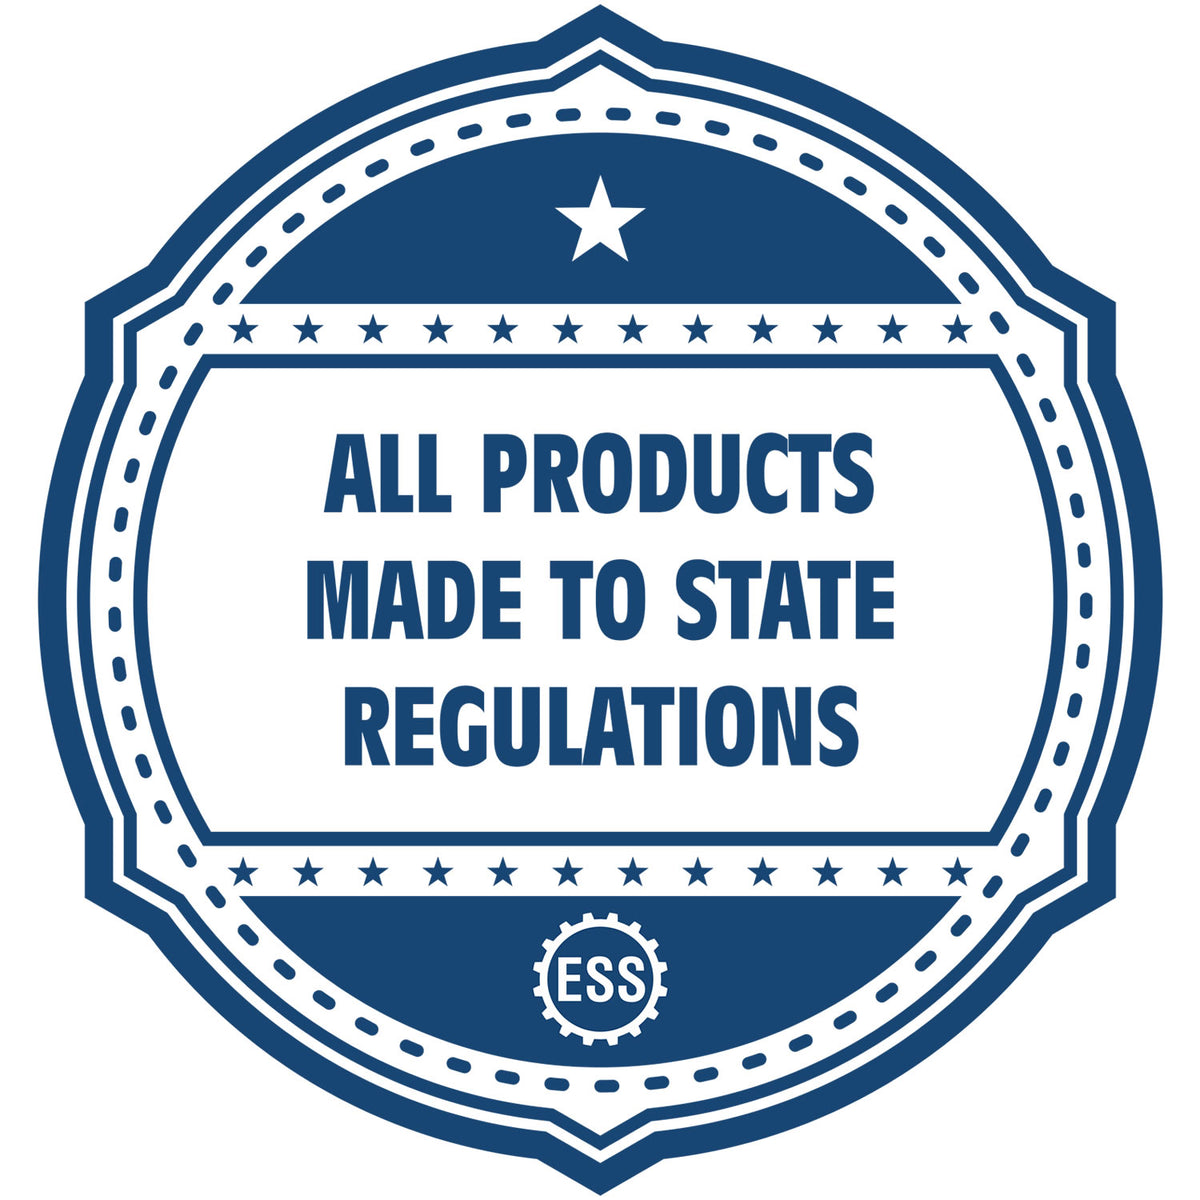 An icon or badge element for the Nevada Desk Surveyor Seal Embosser showing that this product is made in compliance with state regulations.